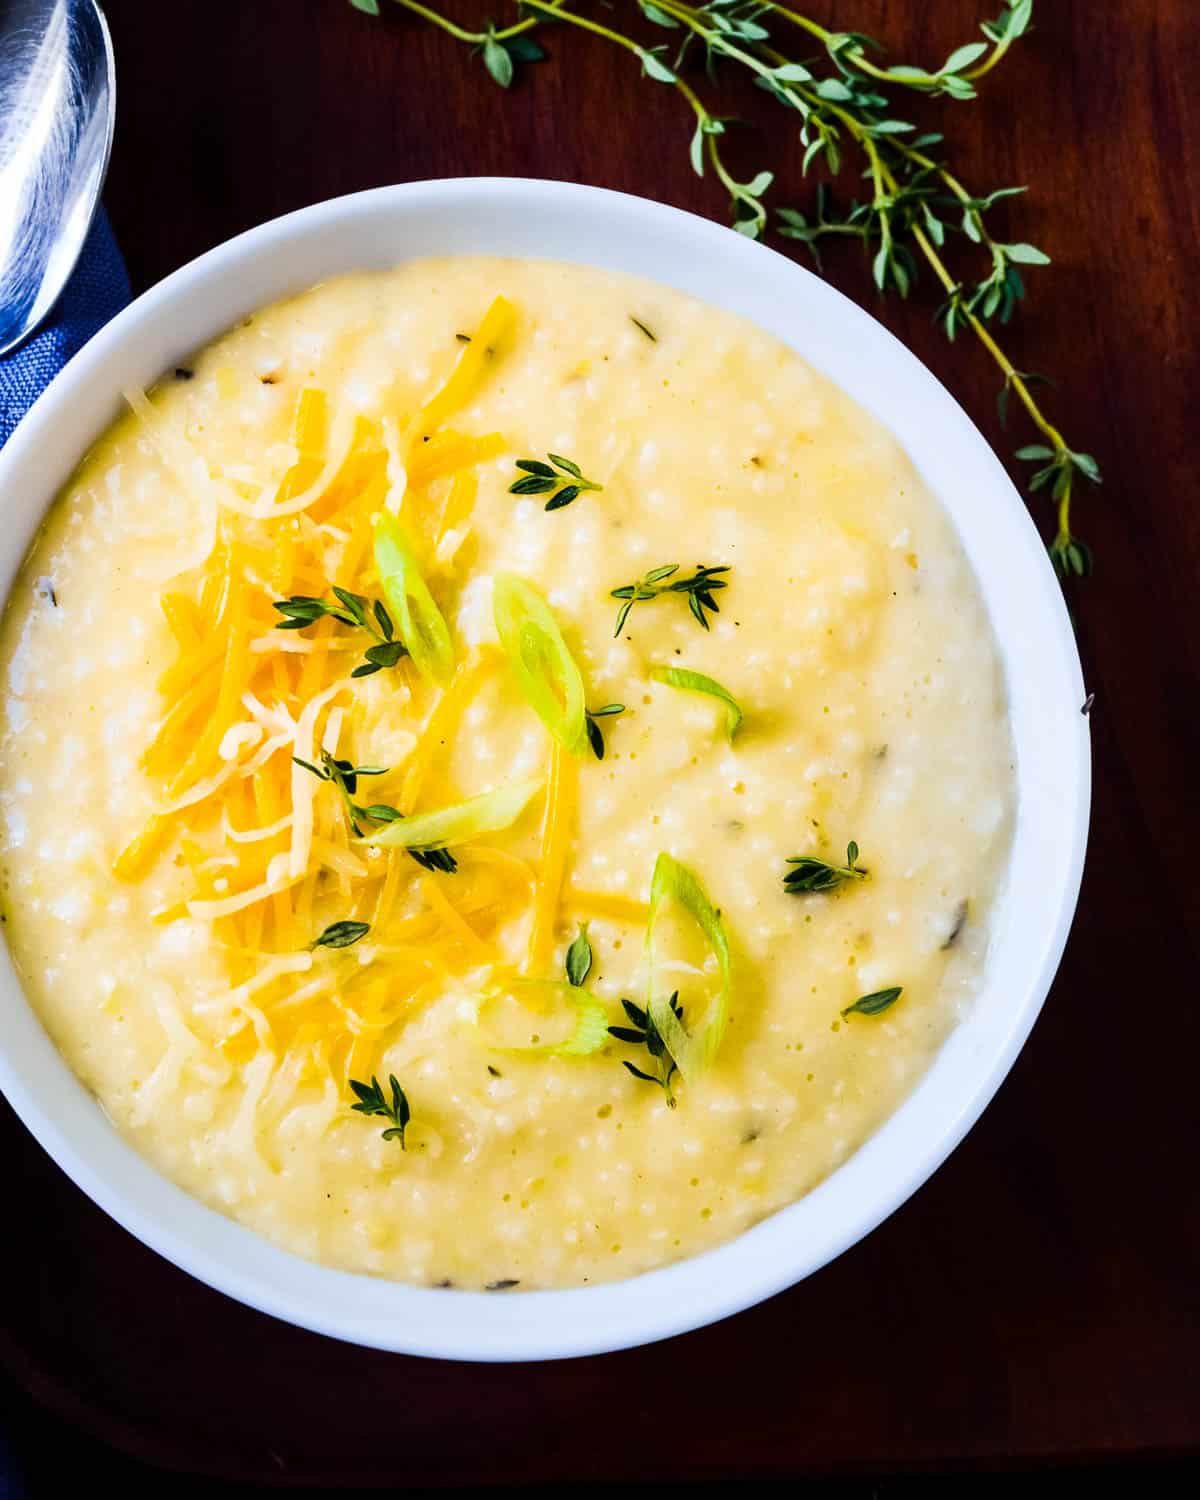 A bowl of cheese grits.